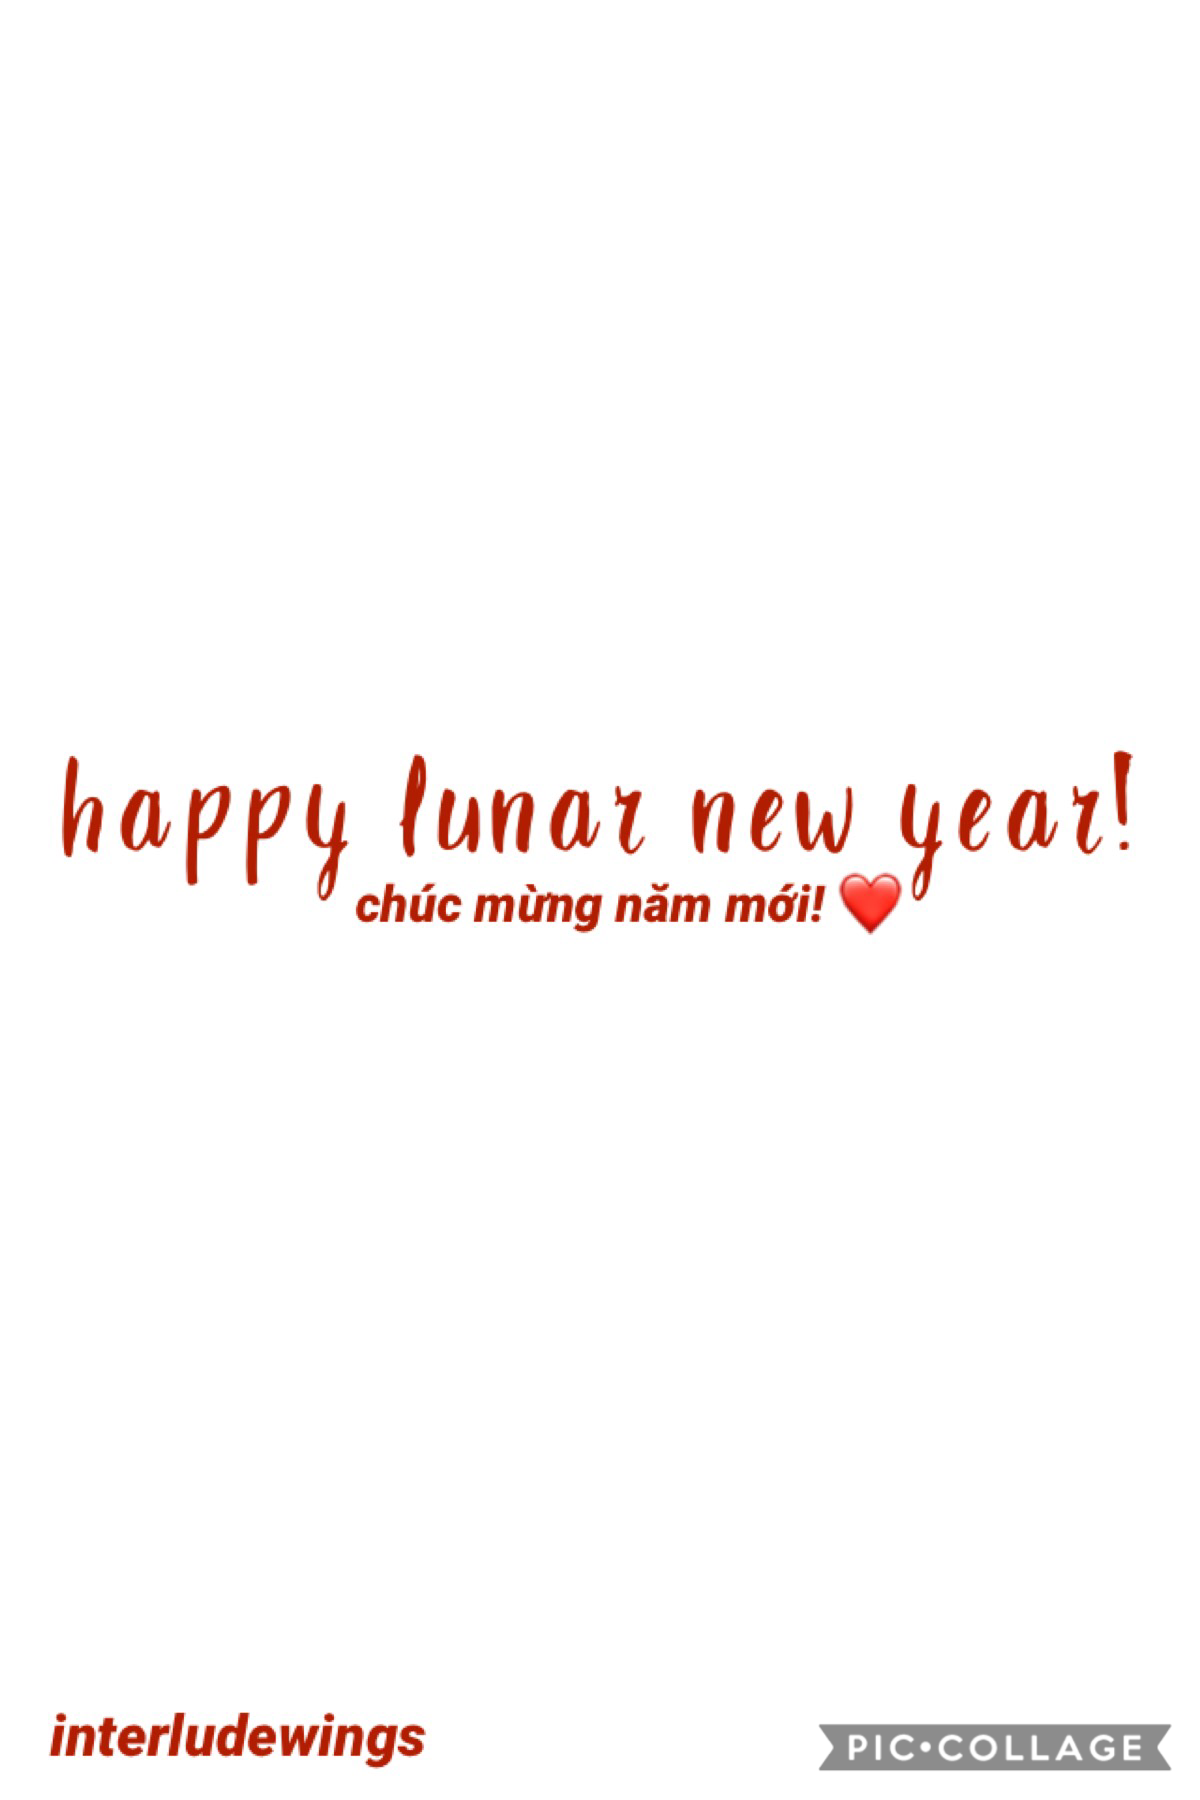 🎇 open 🎇 
happy lunar new years to everyone that celebrates it!! ❤️